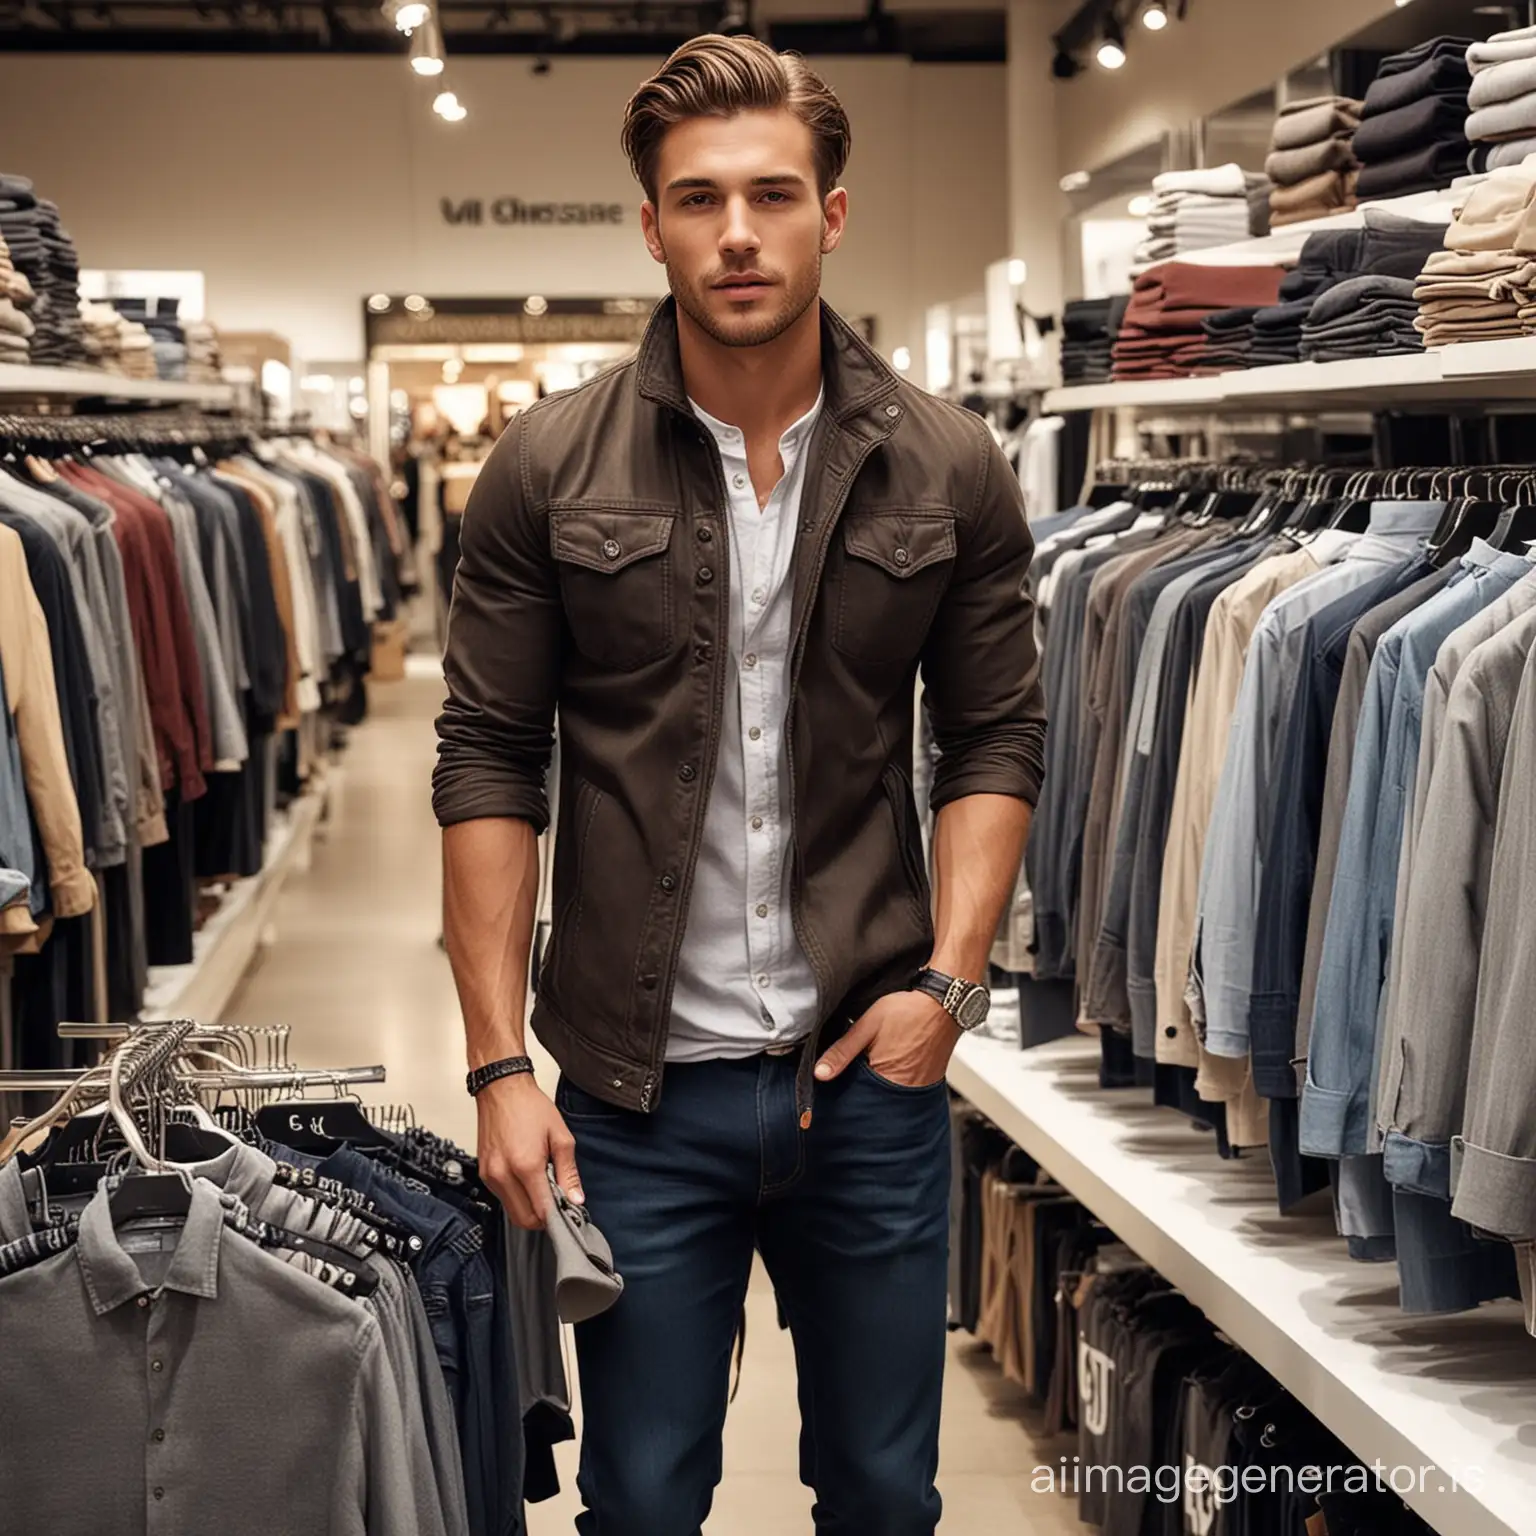 Diverse-Men-Enjoying-Ideal-Shopping-Experience-in-Clothing-Store-for-Magazine-Cover